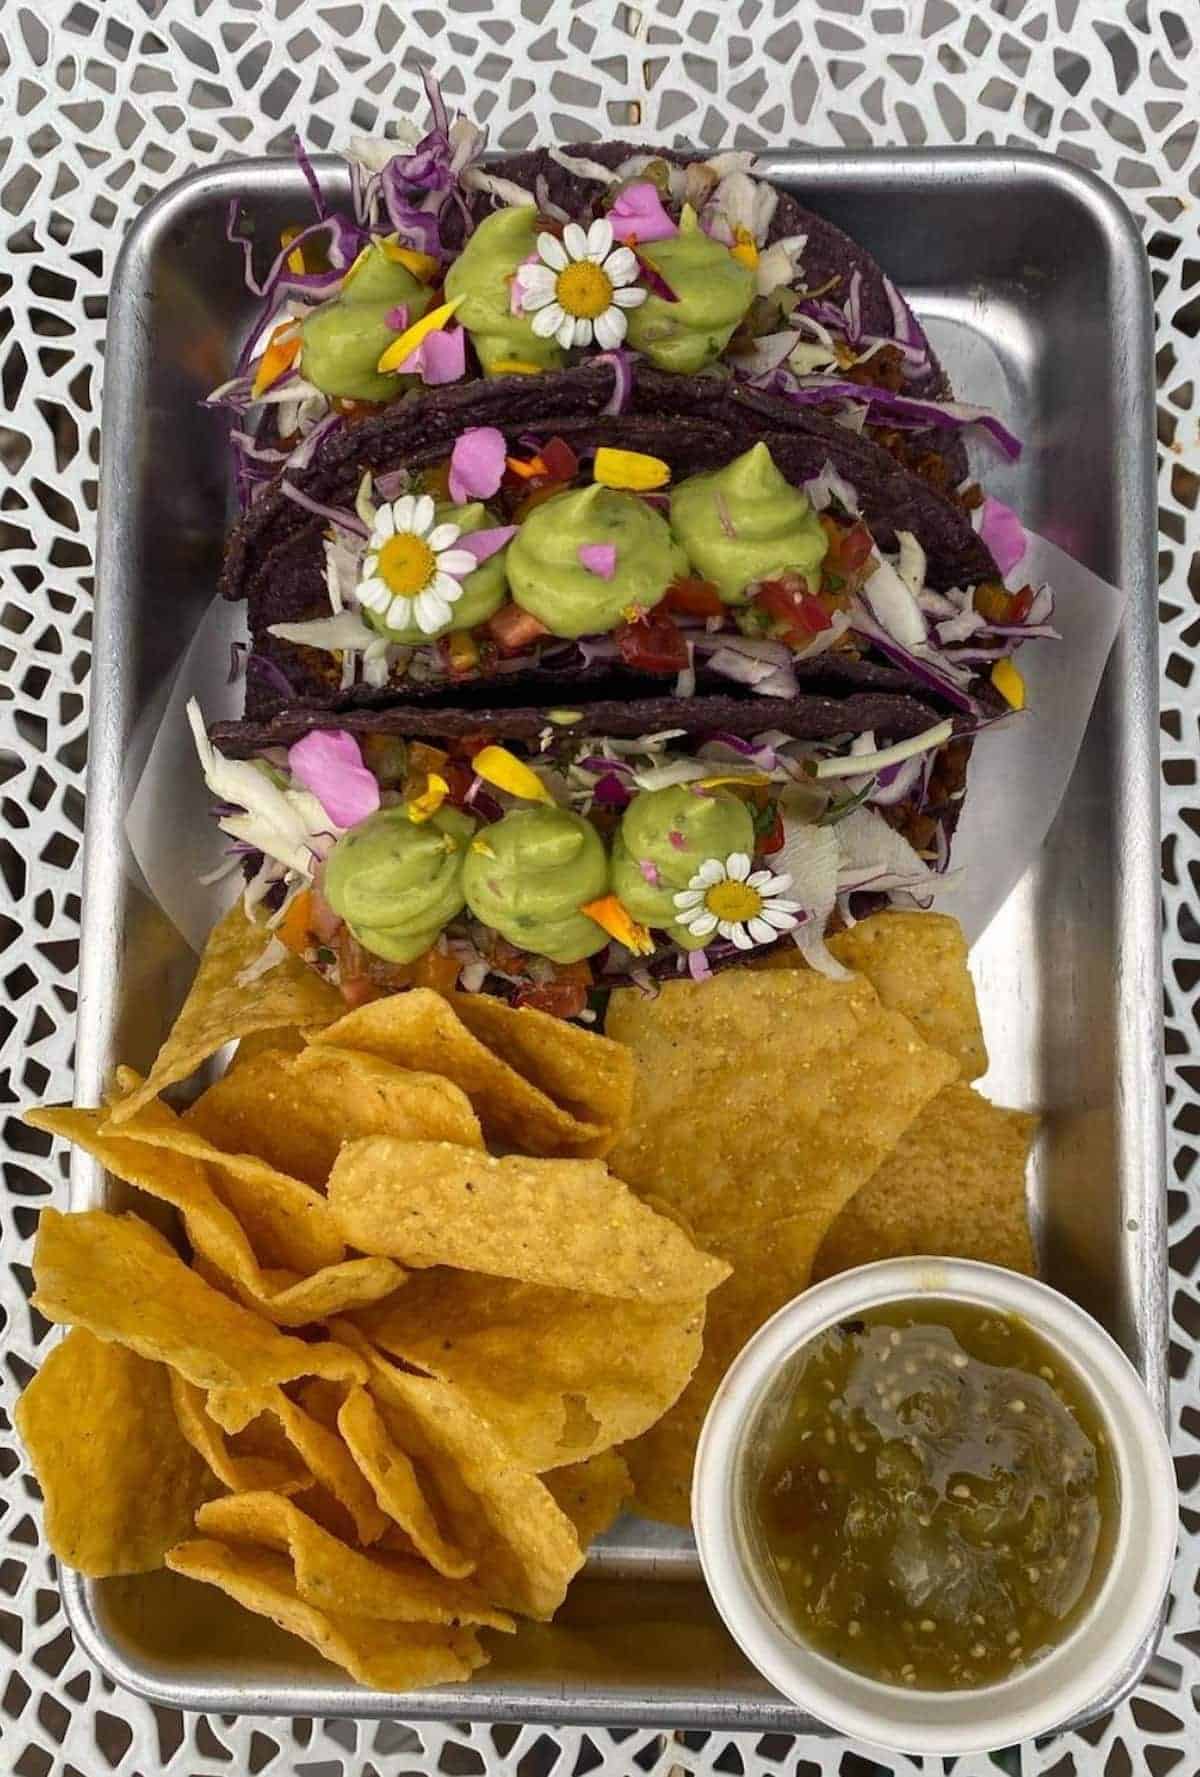 Vegan tacos from The Groovy Floret in Portland.